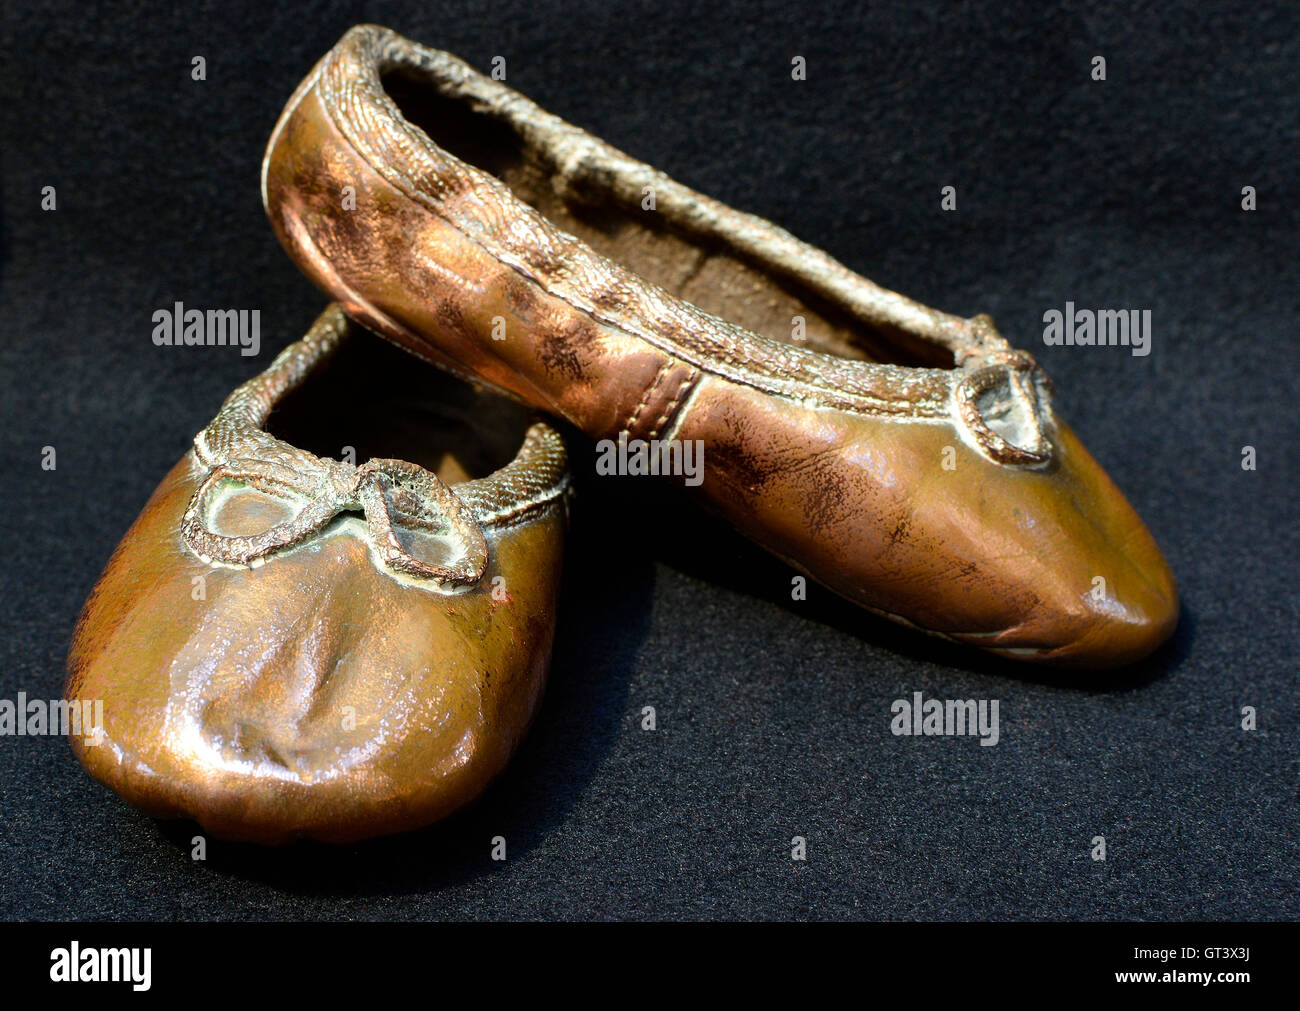 Her first ballet shoes. Copper toddler ballet shoes. Dancing shoes. Baby ballet shoes. Pair crossed in L shape. Stock Photo